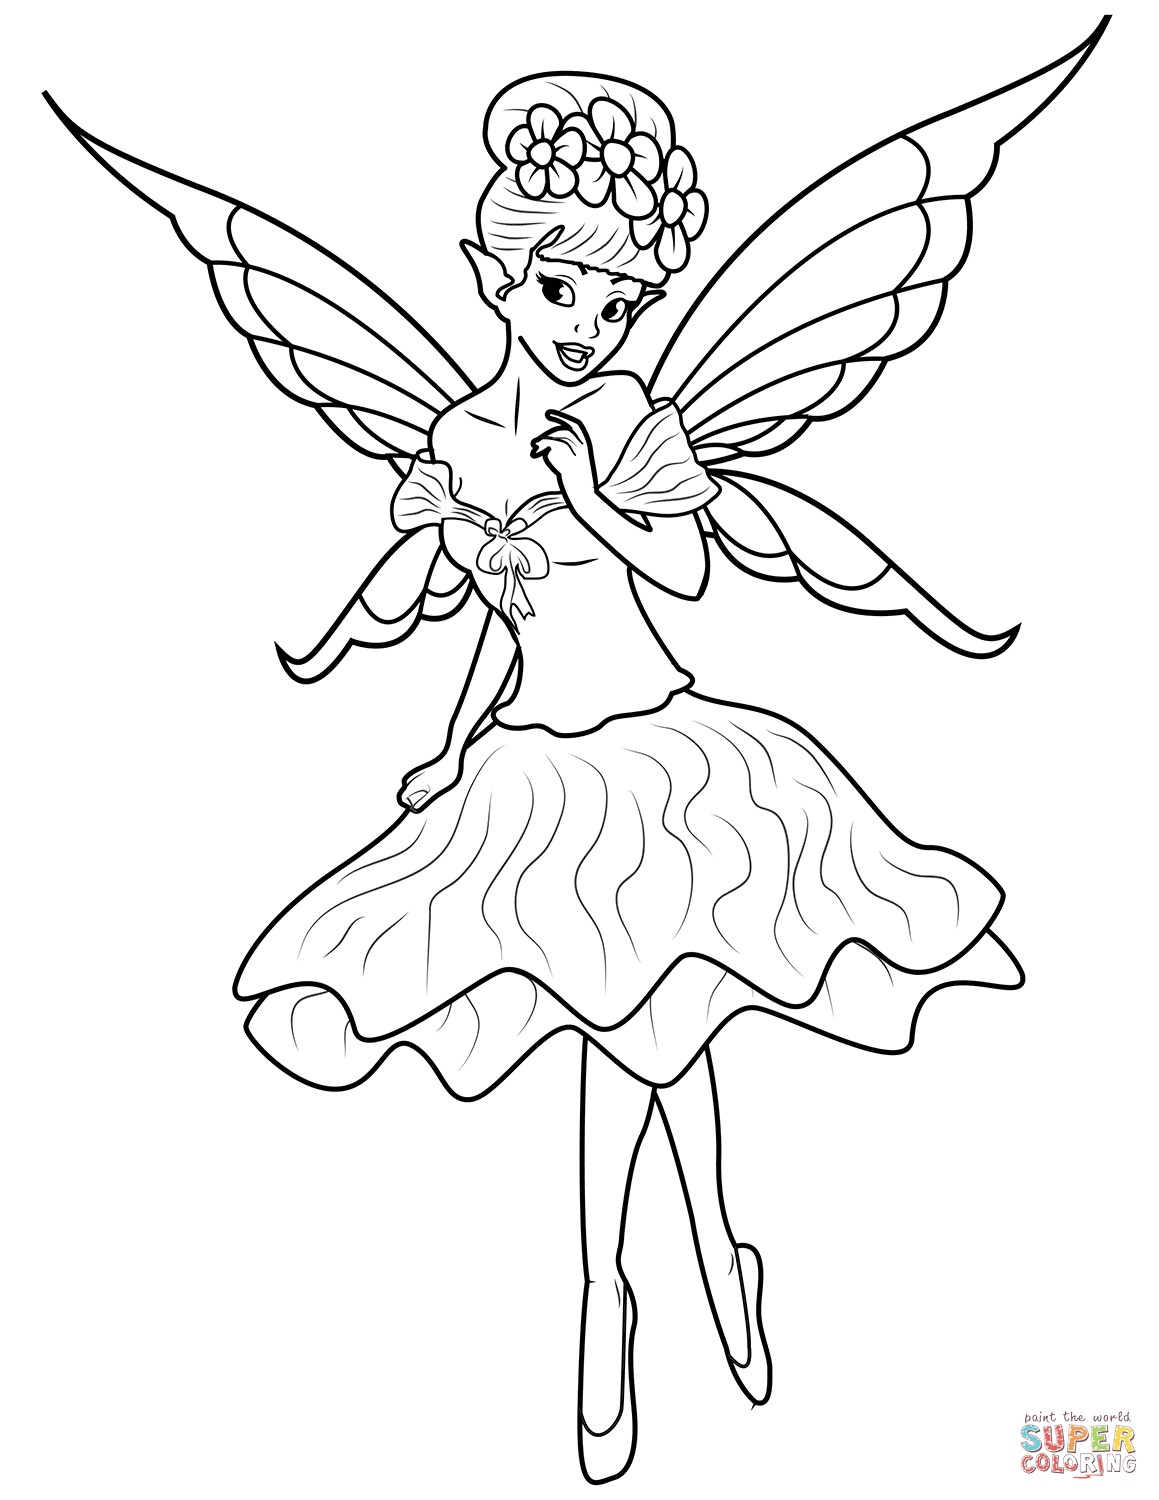 Fairy Coloring Sheet
 Fairy coloring page